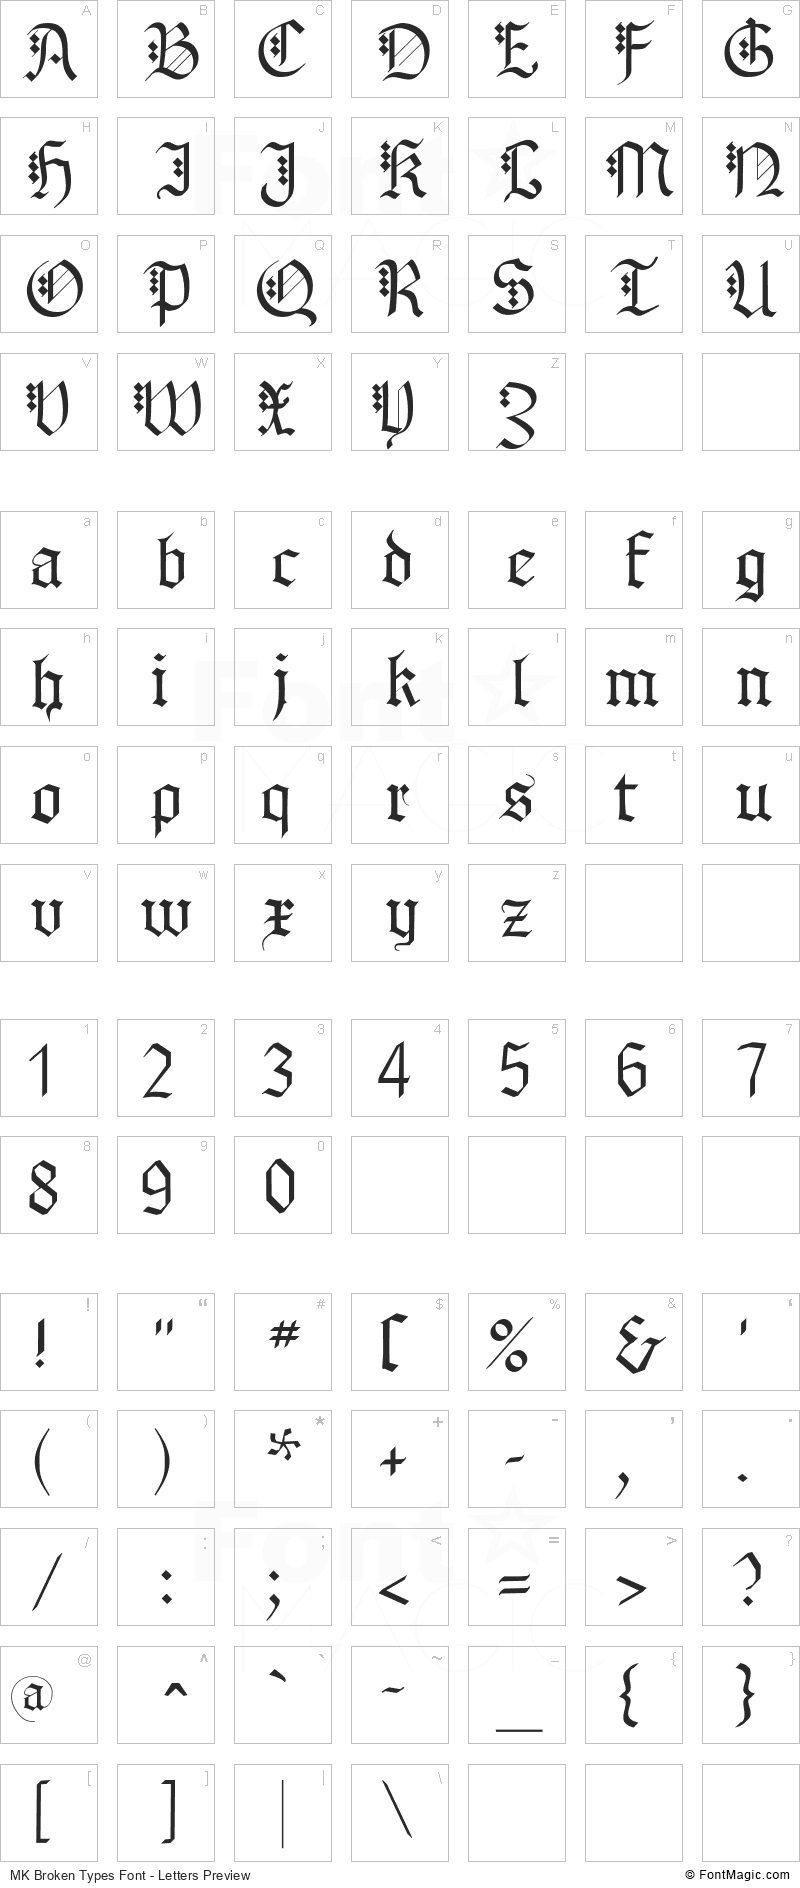 MK Broken Types Font - All Latters Preview Chart